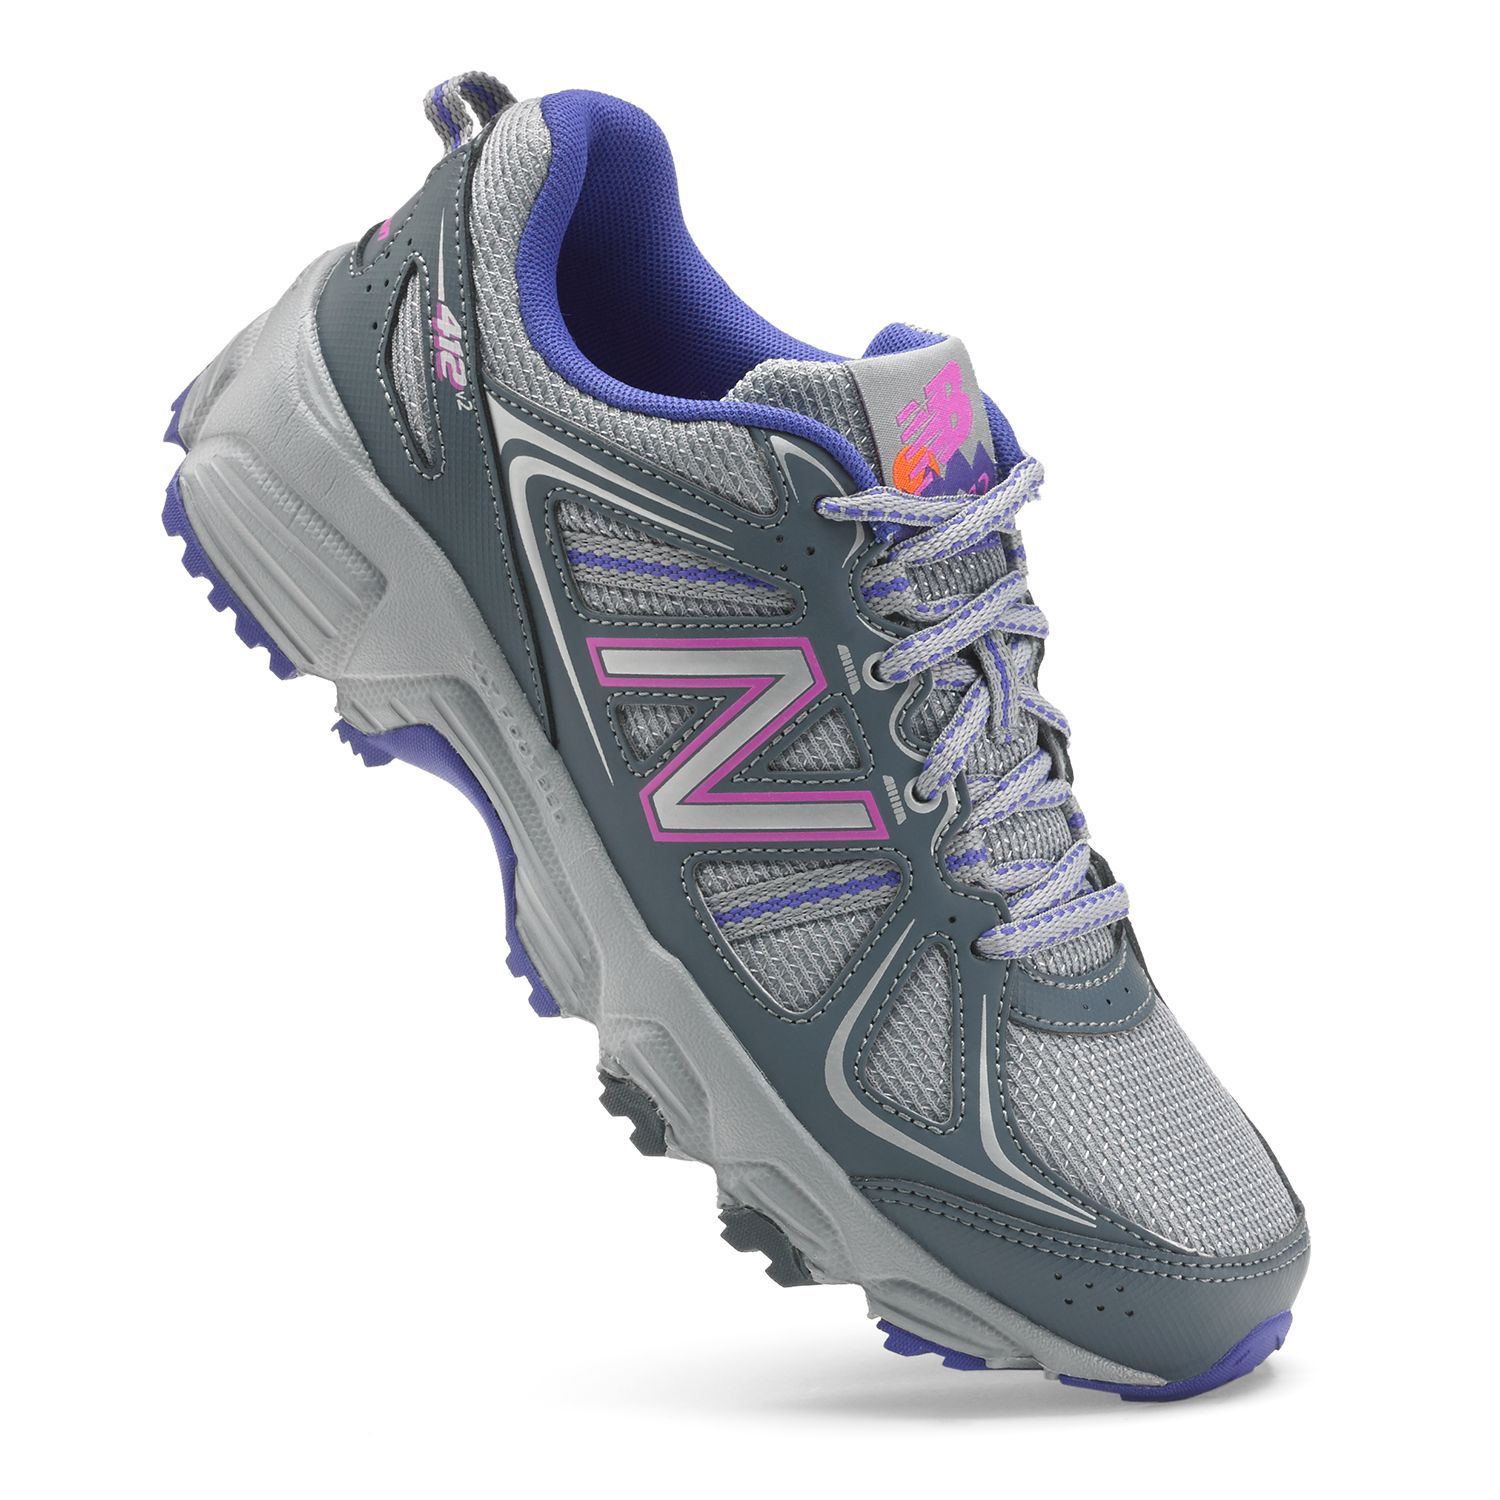 new balance 412 men's trail running shoes review